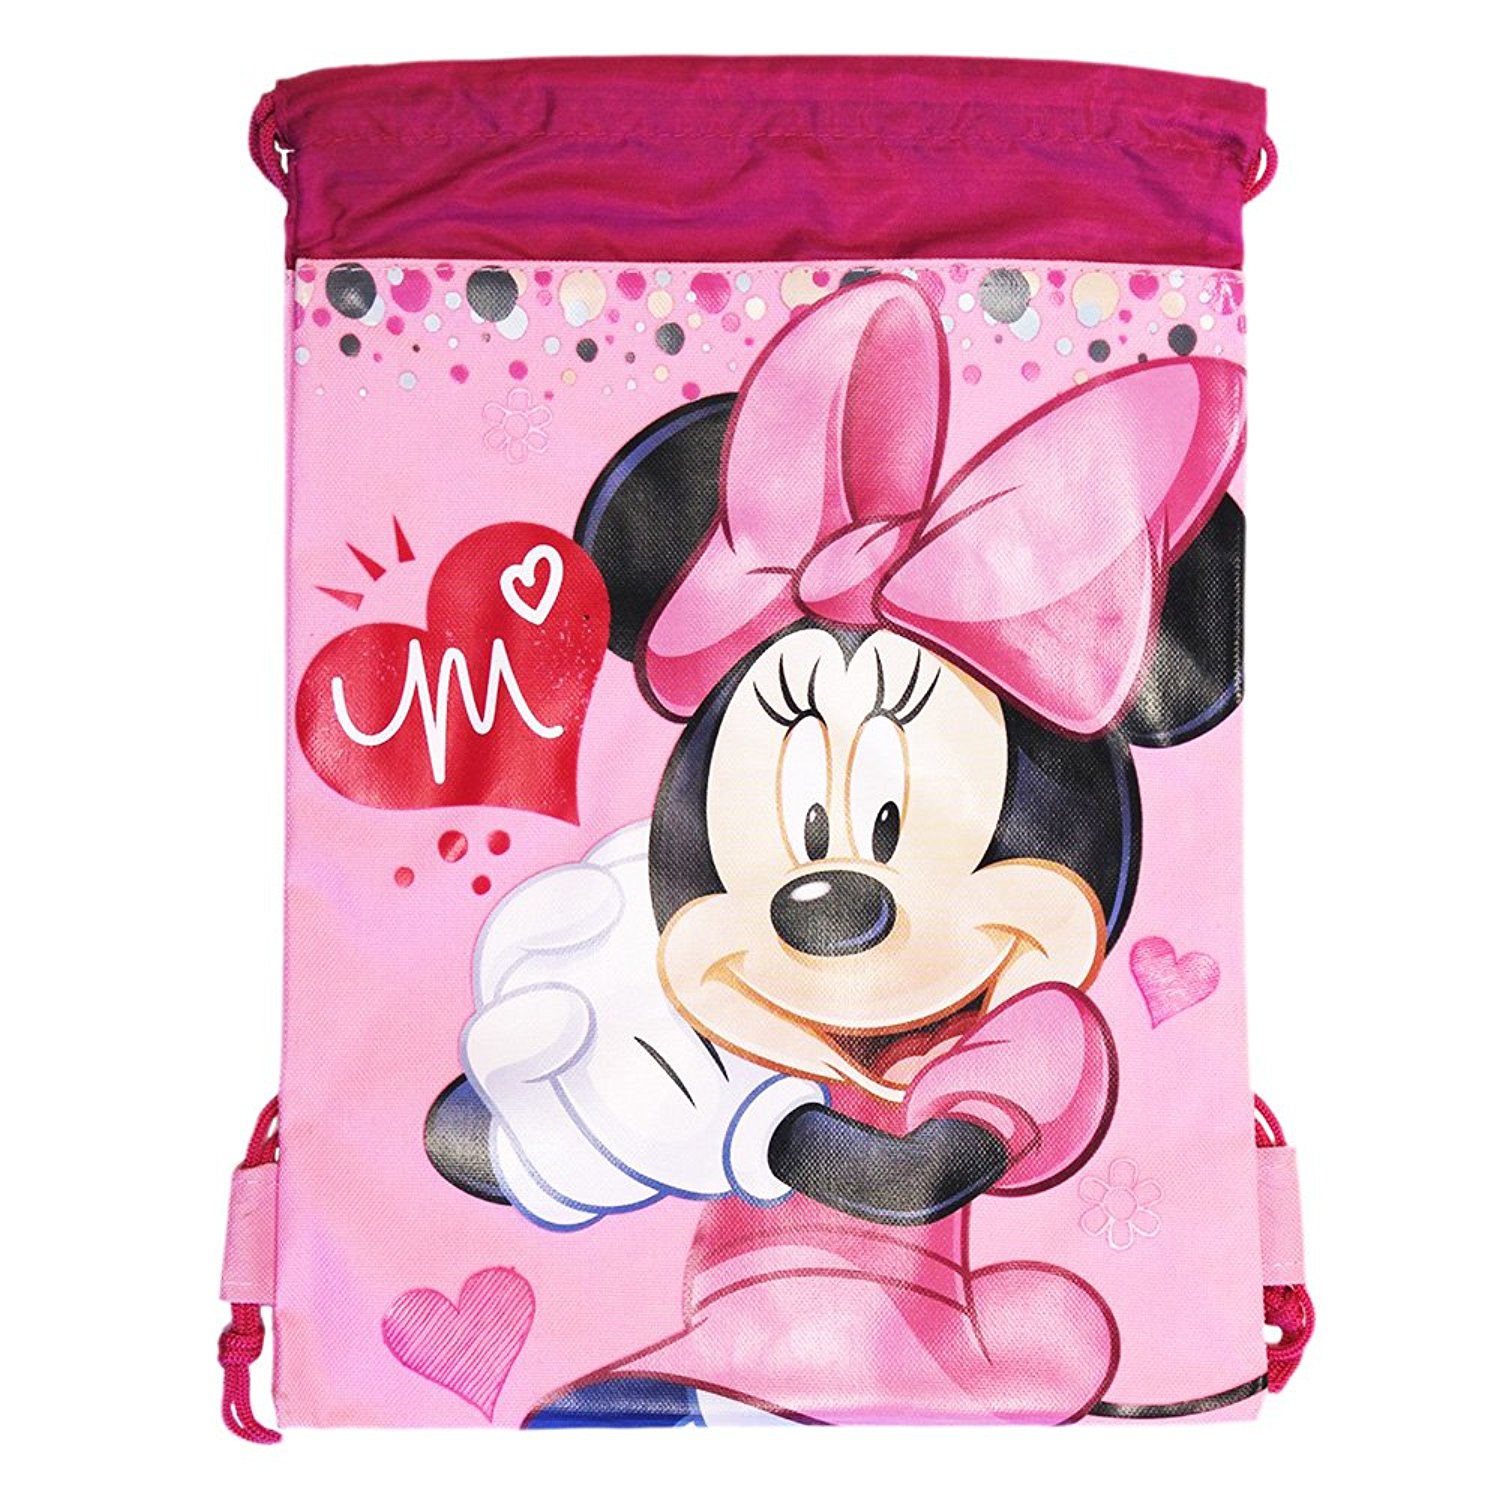 Mickey & Minnie Mouse Drawstring Backpack - Large Drawsting Bags Set Of 2 - image 2 of 3